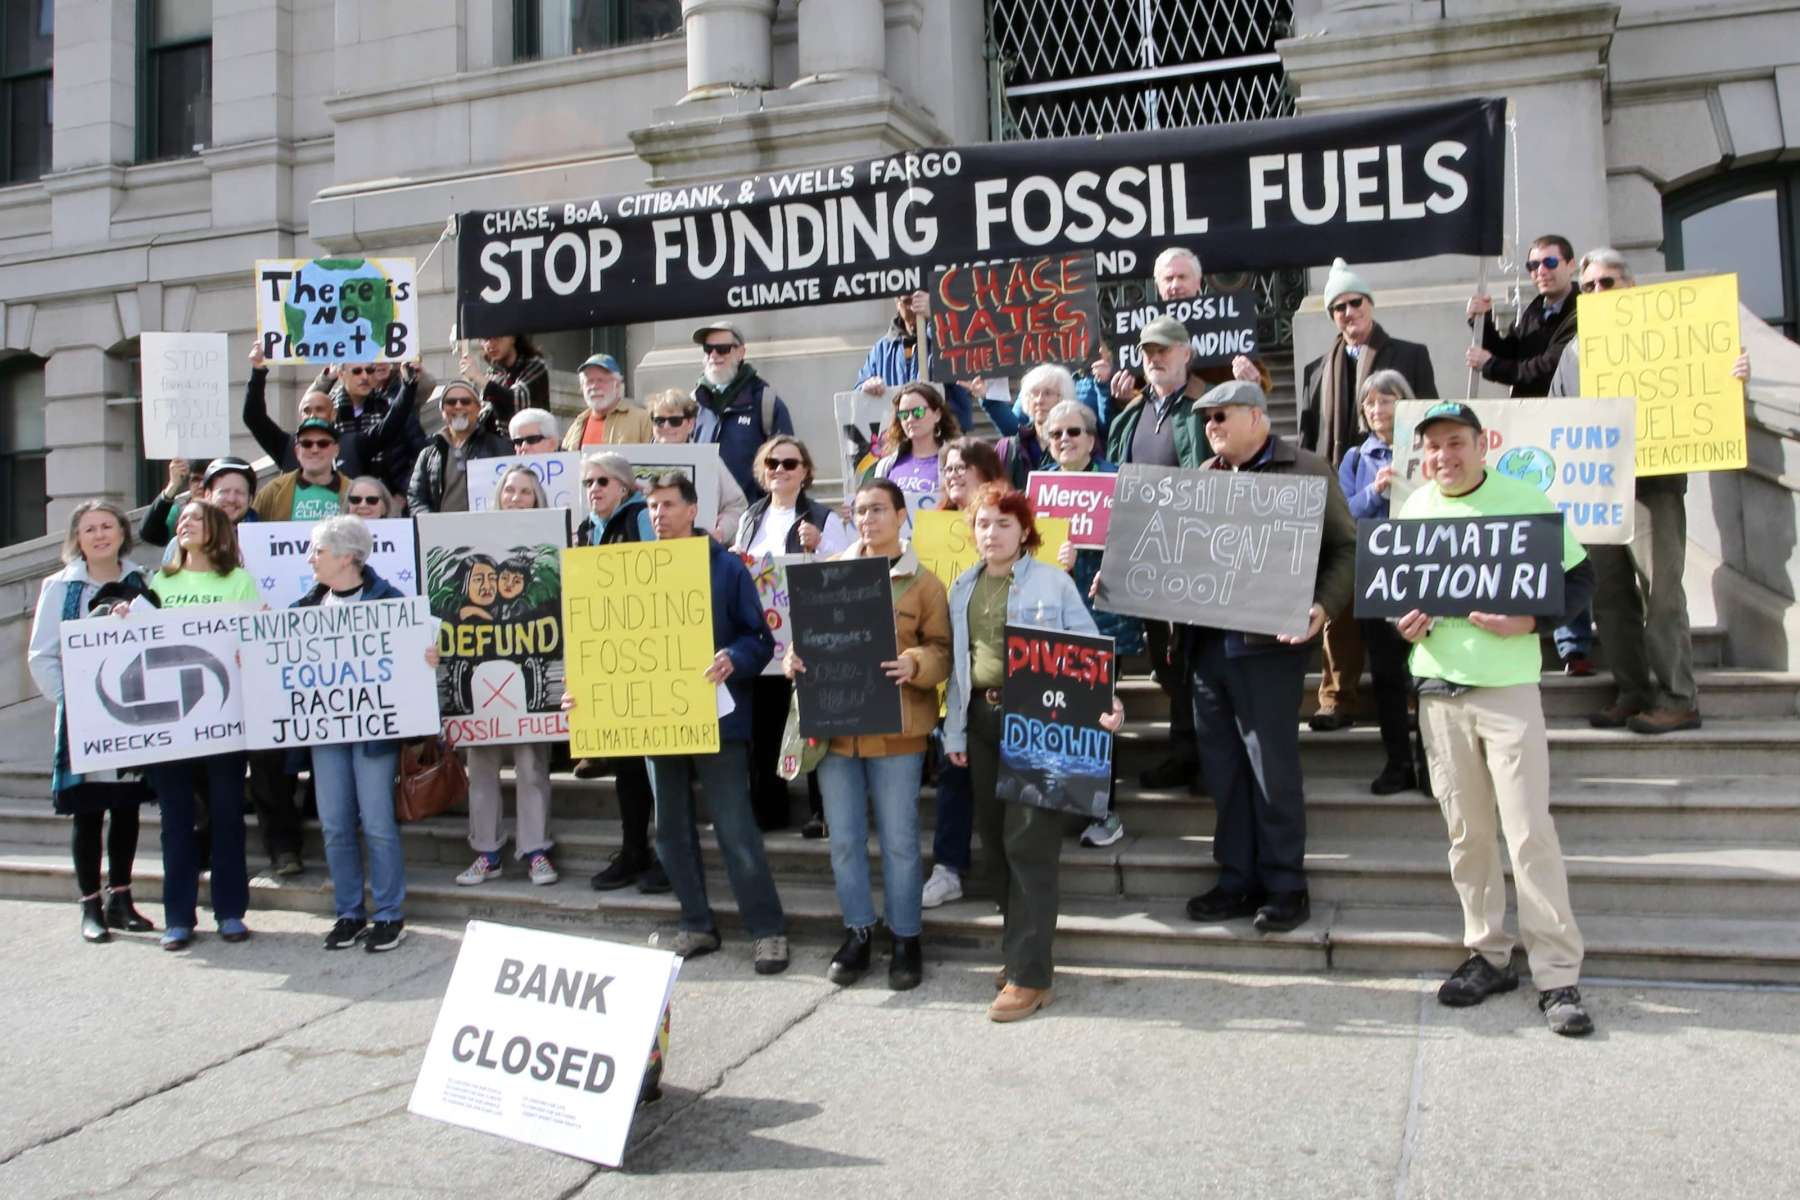 Campaign seeks to encourage fossil fuel divestment among RI municipalities and non-profits